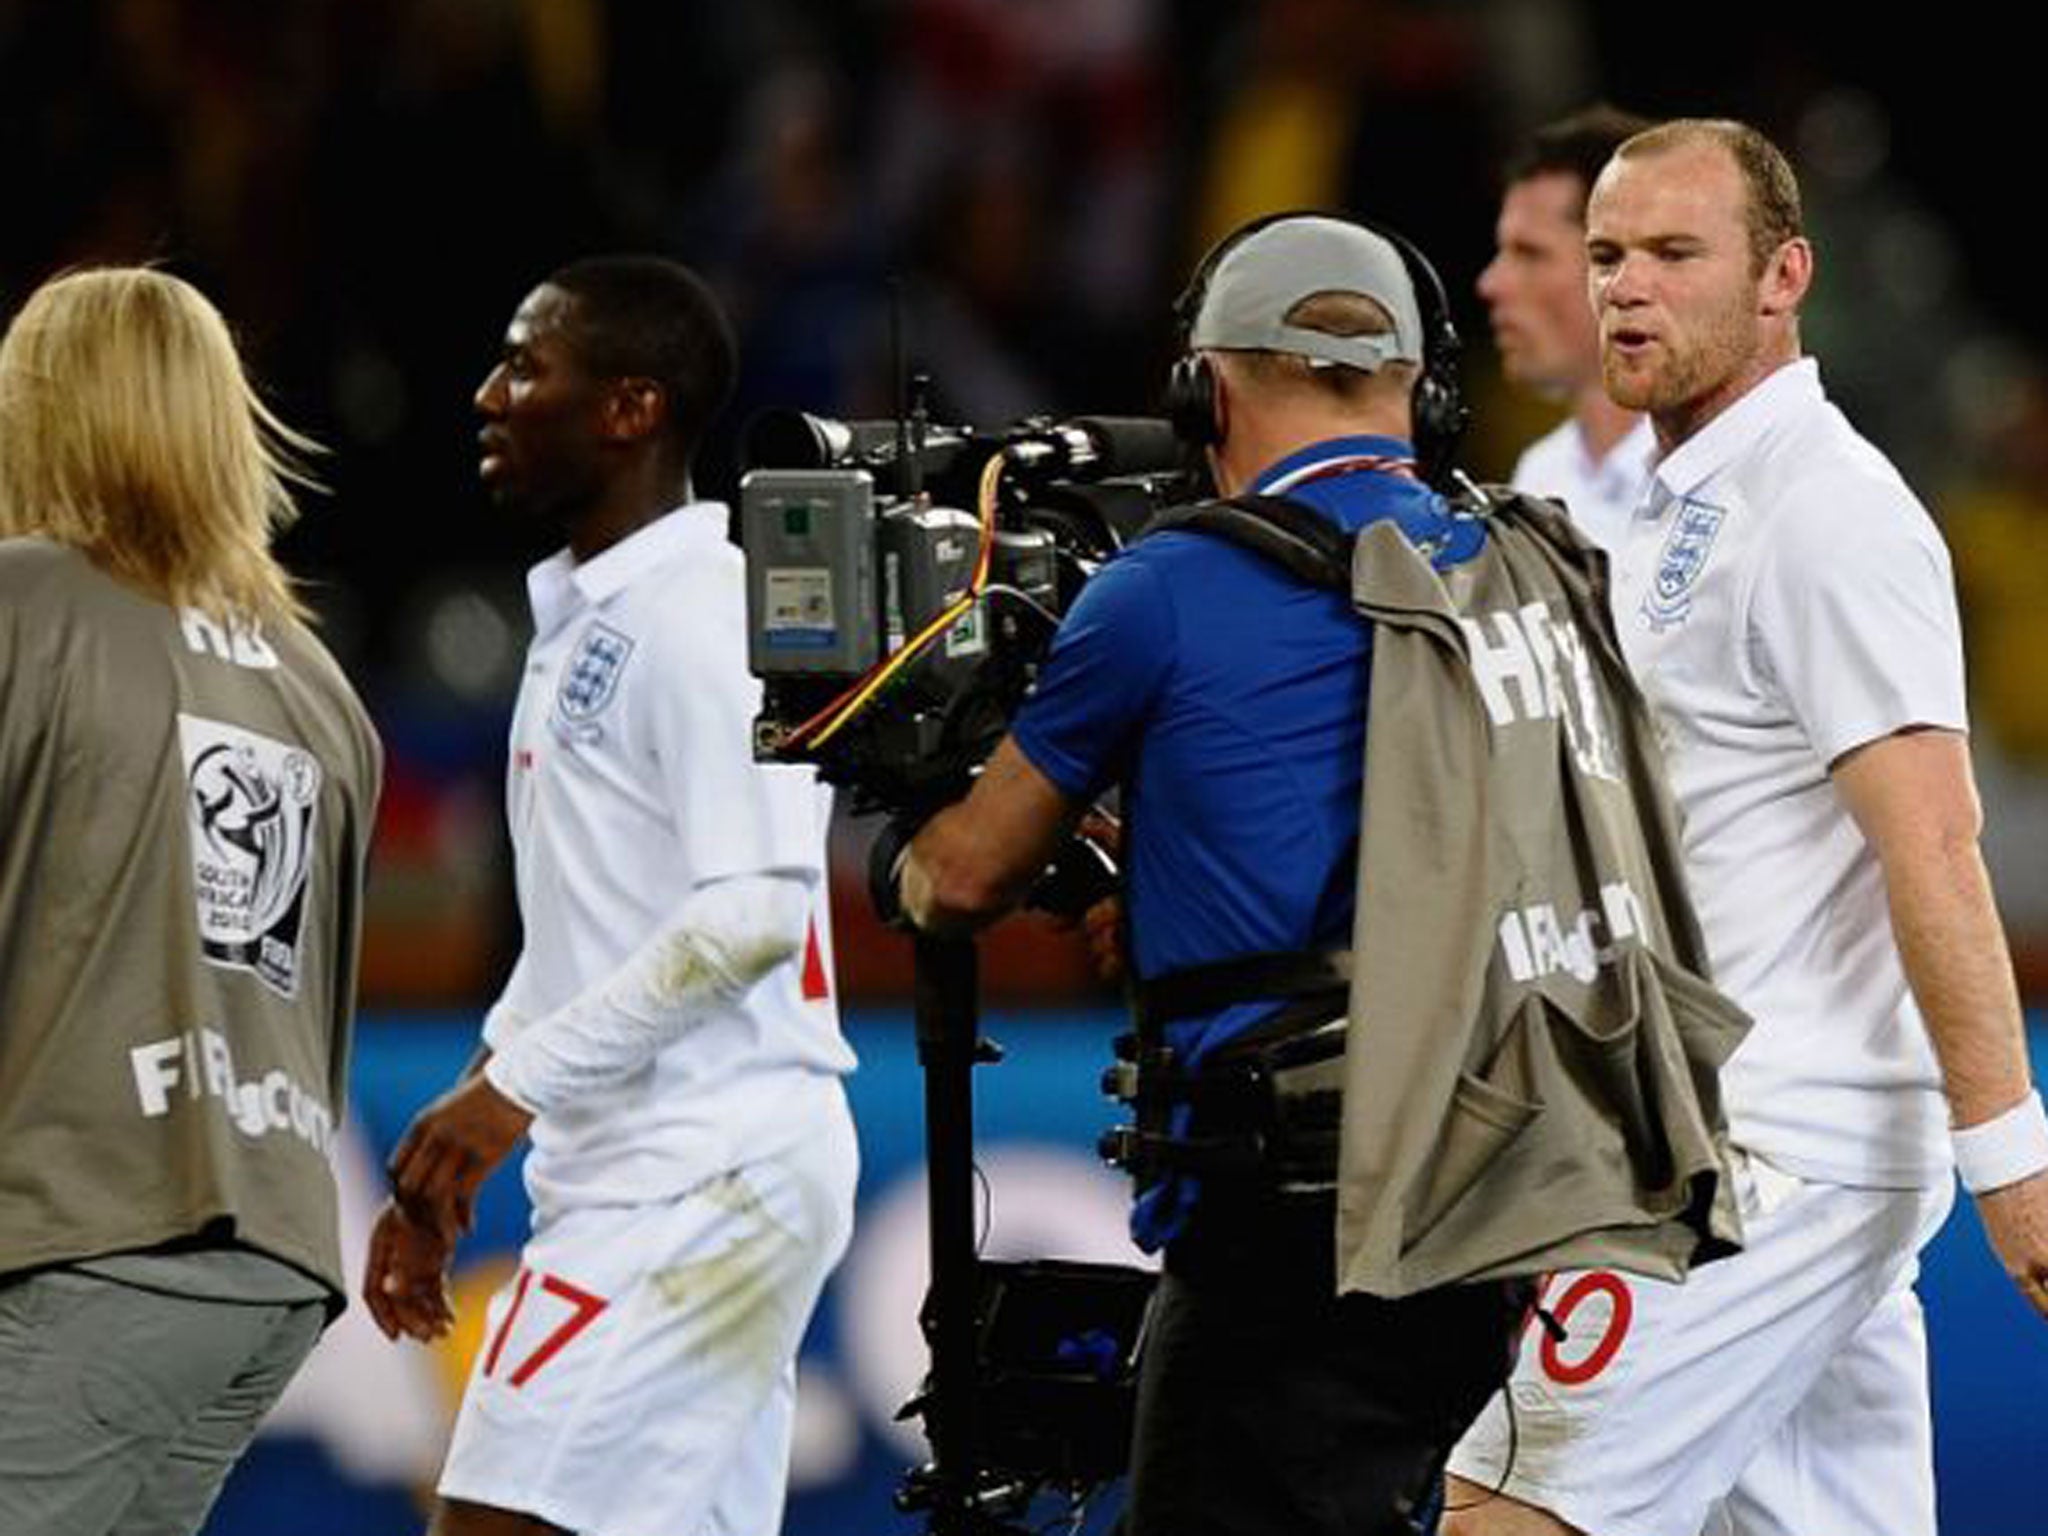 Wayne Rooney of England speaks to a cameraman as he walks off the pitch dejected after the 2010 Fifa World Cup South Africa Group C match between England and Algeria